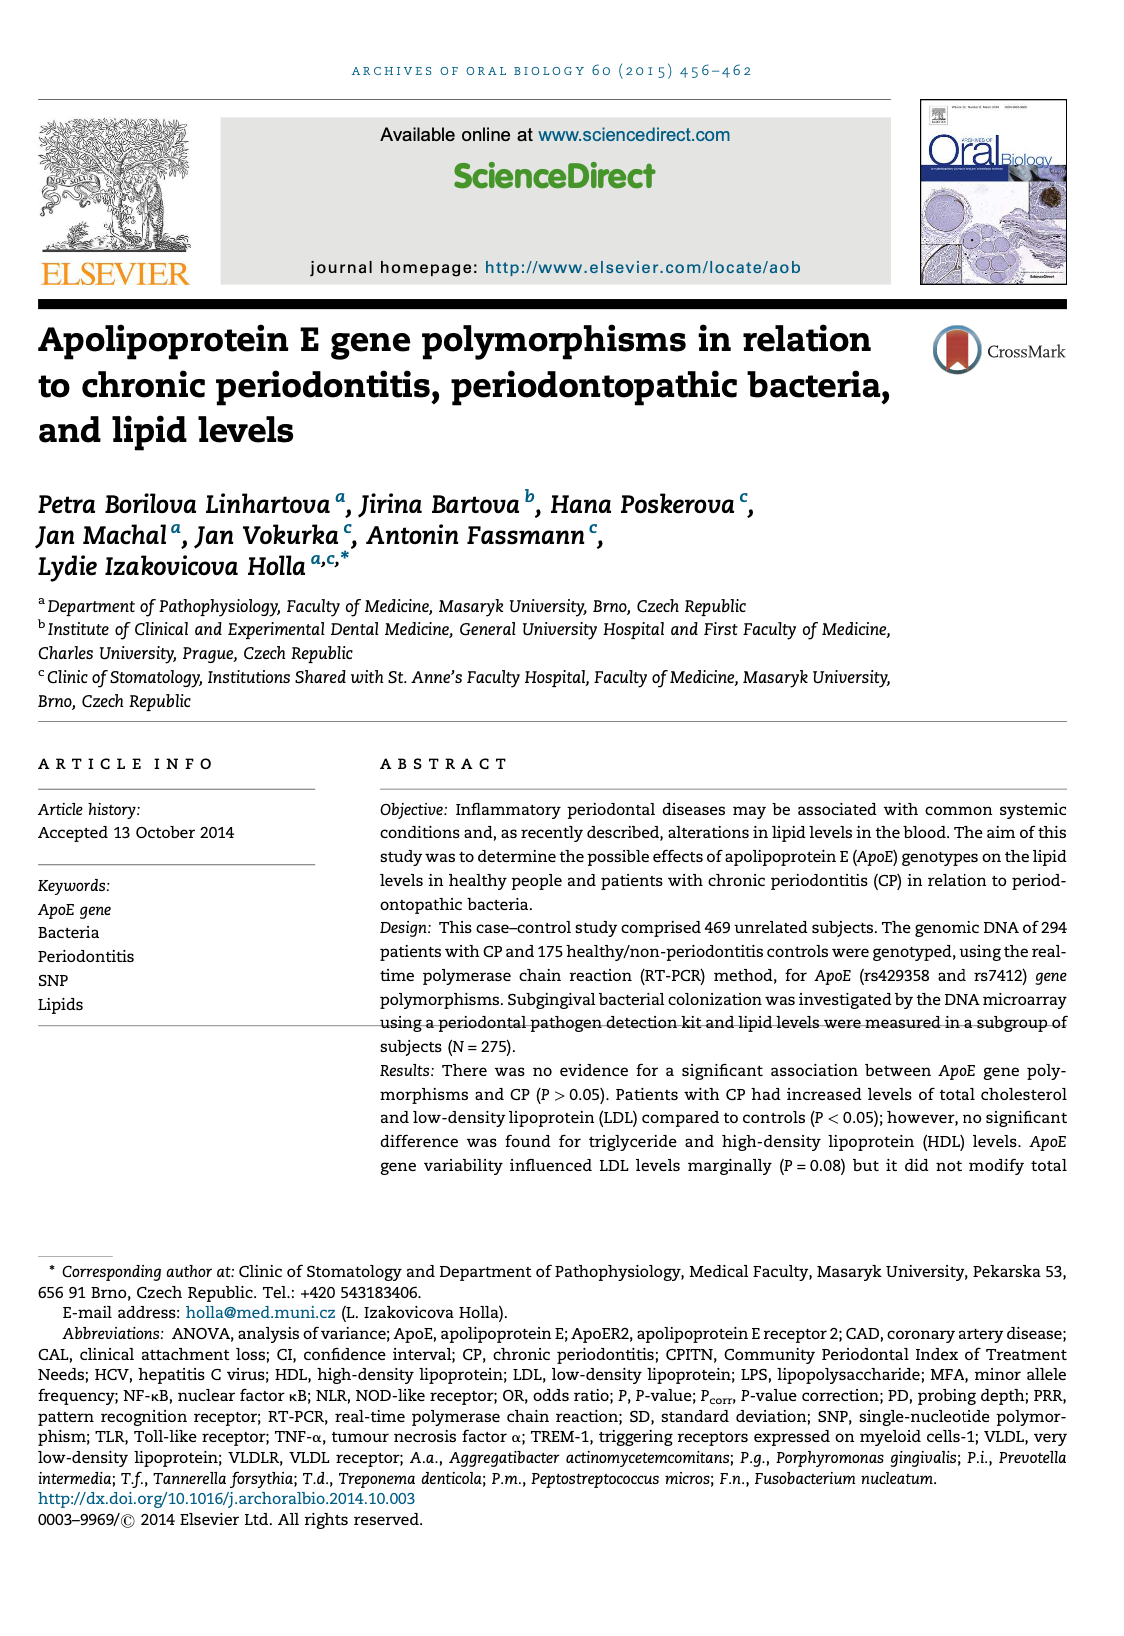 Apolipoprotein E gene polymorphisms in relation to chronic periodontitis, periodontopathic bacteria, and lipid levels